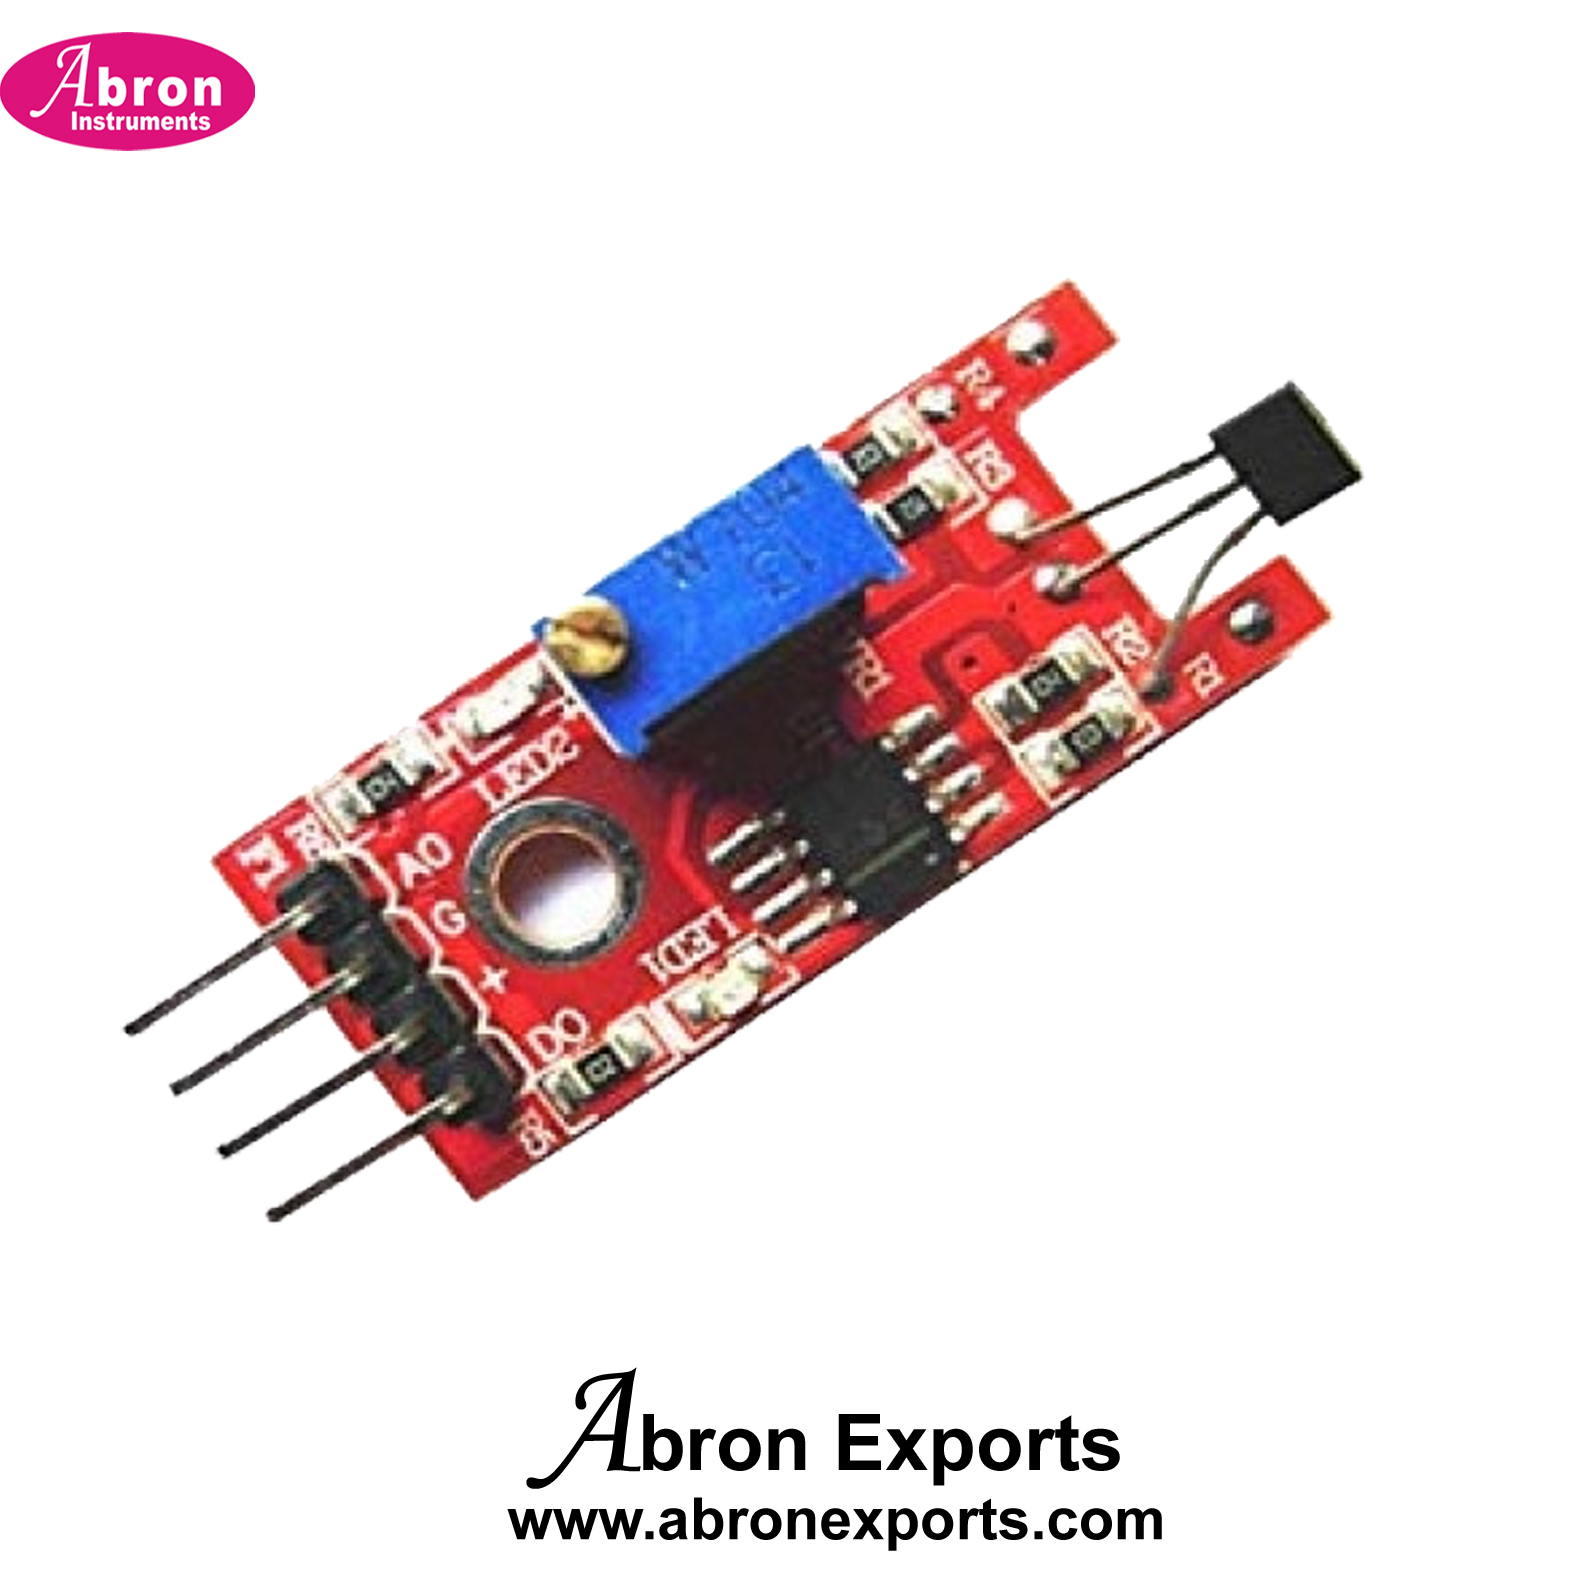 Electronic Curcit Spare Magnetic Sensor With Plate Bread Board Connector Abron AE-1224SMG 